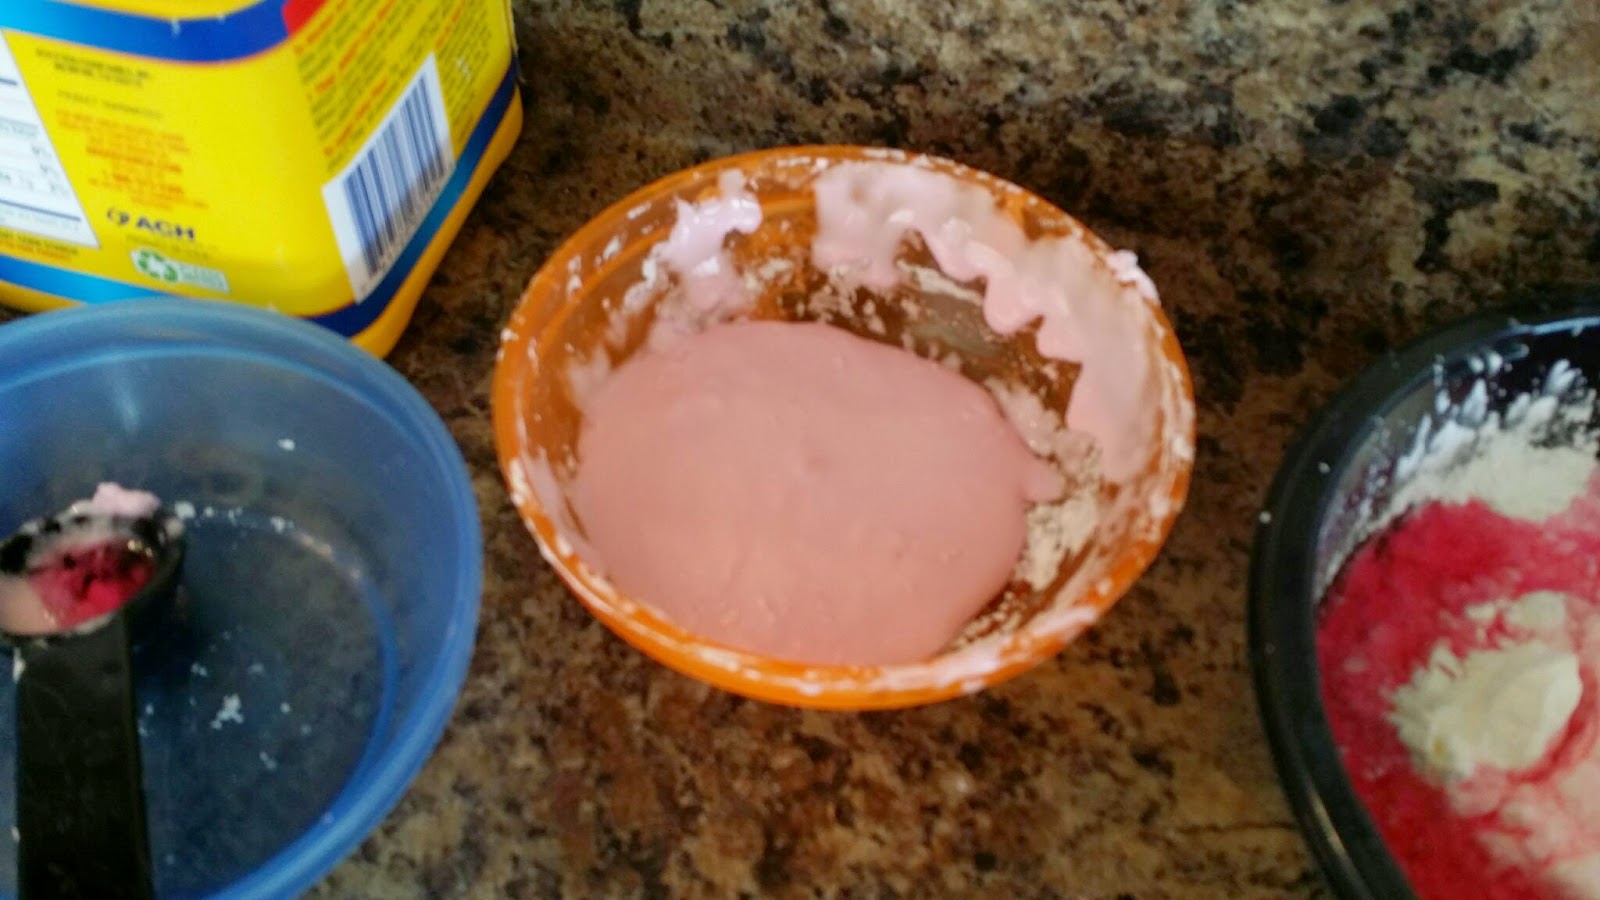 silly putty recipe with 2 ingredients